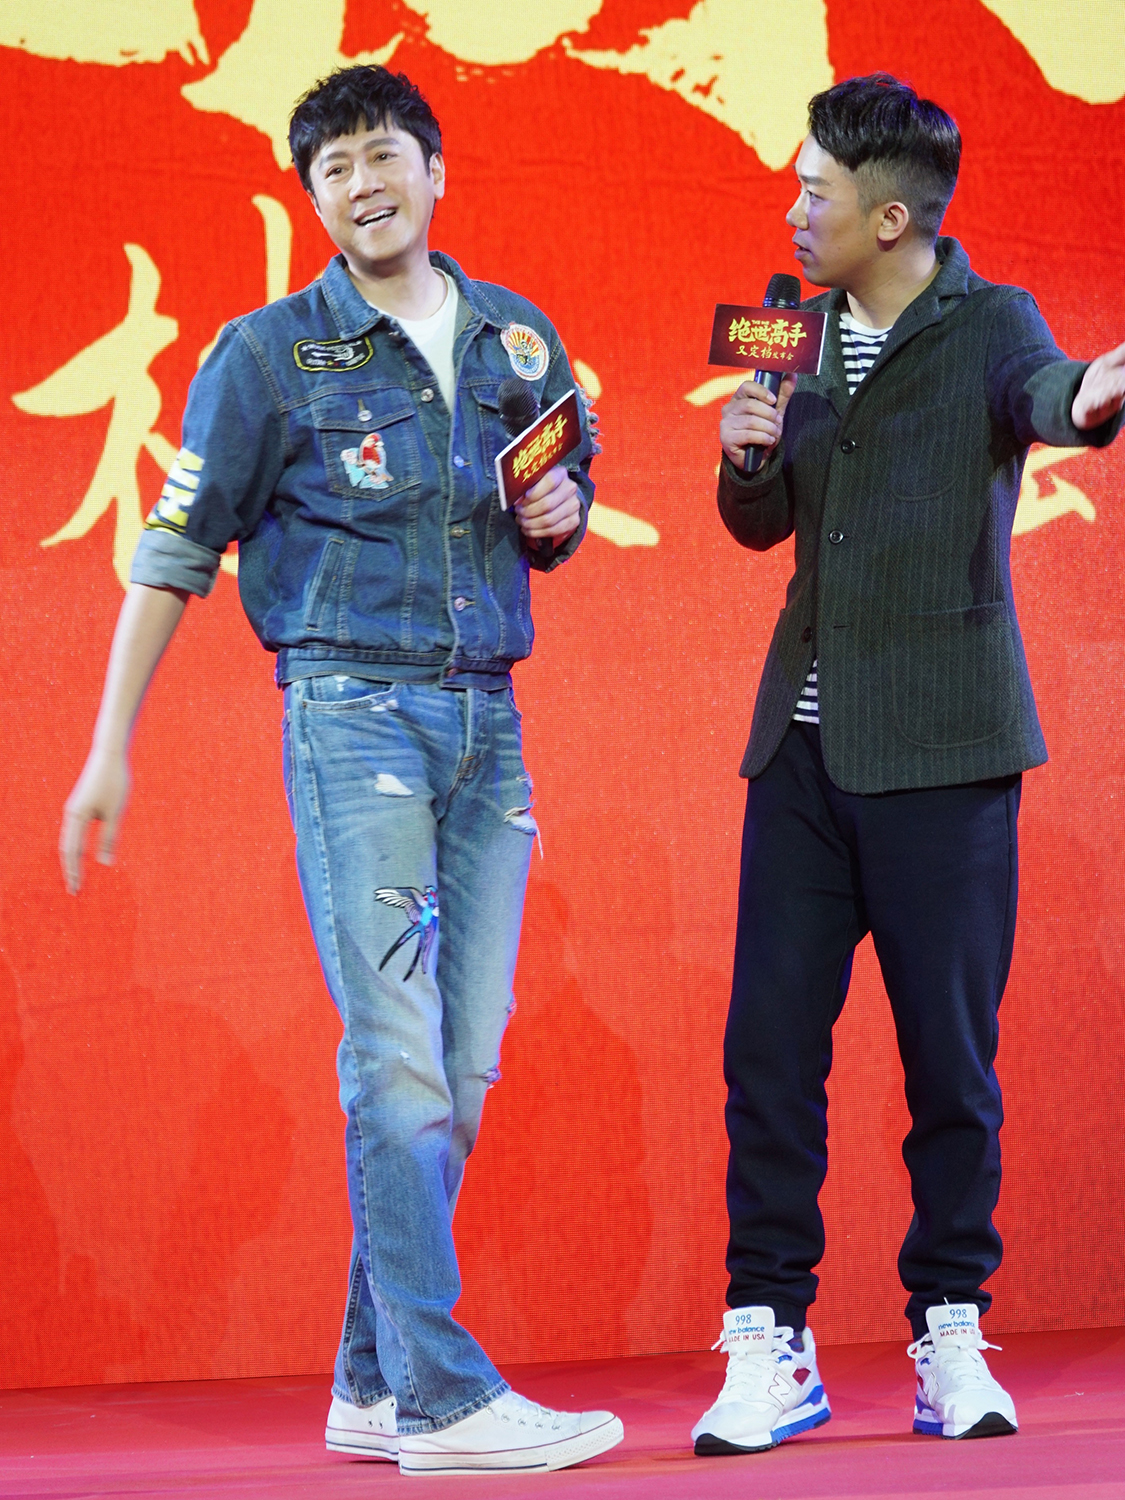 Veteran singer Cai Guoqing (left) and film director Lu Zhenyu (right) attend a promotional event in Beijing on Thursday afternoon, April 6, 2017 for their new film project The One.[Photo: provided to China Plus]